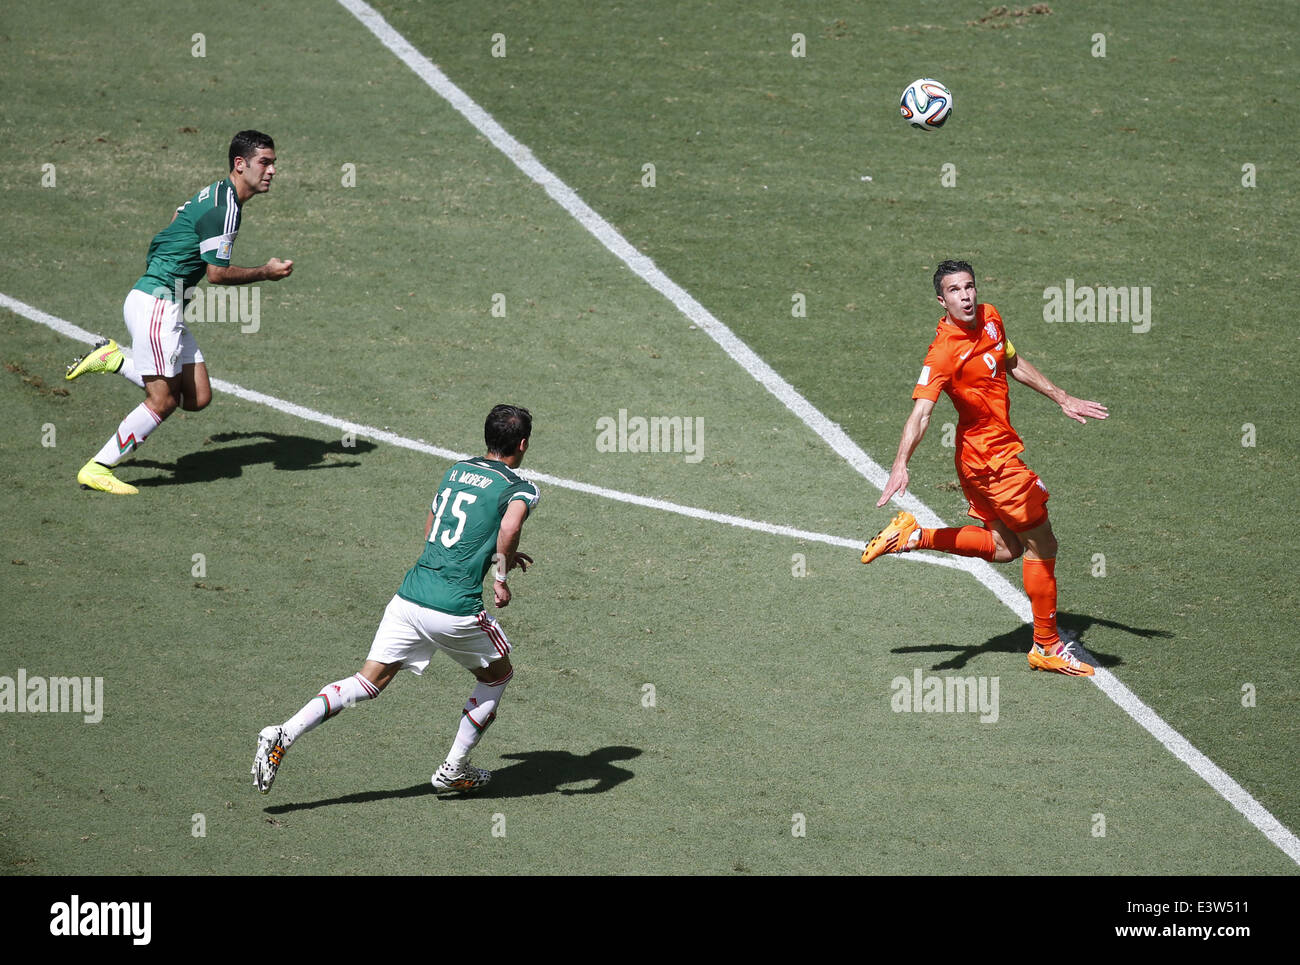 Fortaleza, Brazil. 29th June, 2014. Netherlands' Robin van Persie (R) vies for the ball during a Round of 16 match between Netherlands and Mexico of 2014 FIFA World Cup at the Estadio Castelao Stadium in Fortaleza, Brazil, on June 29, 2014. Credit:  Liao Yujie/Xinhua/Alamy Live News Stock Photo